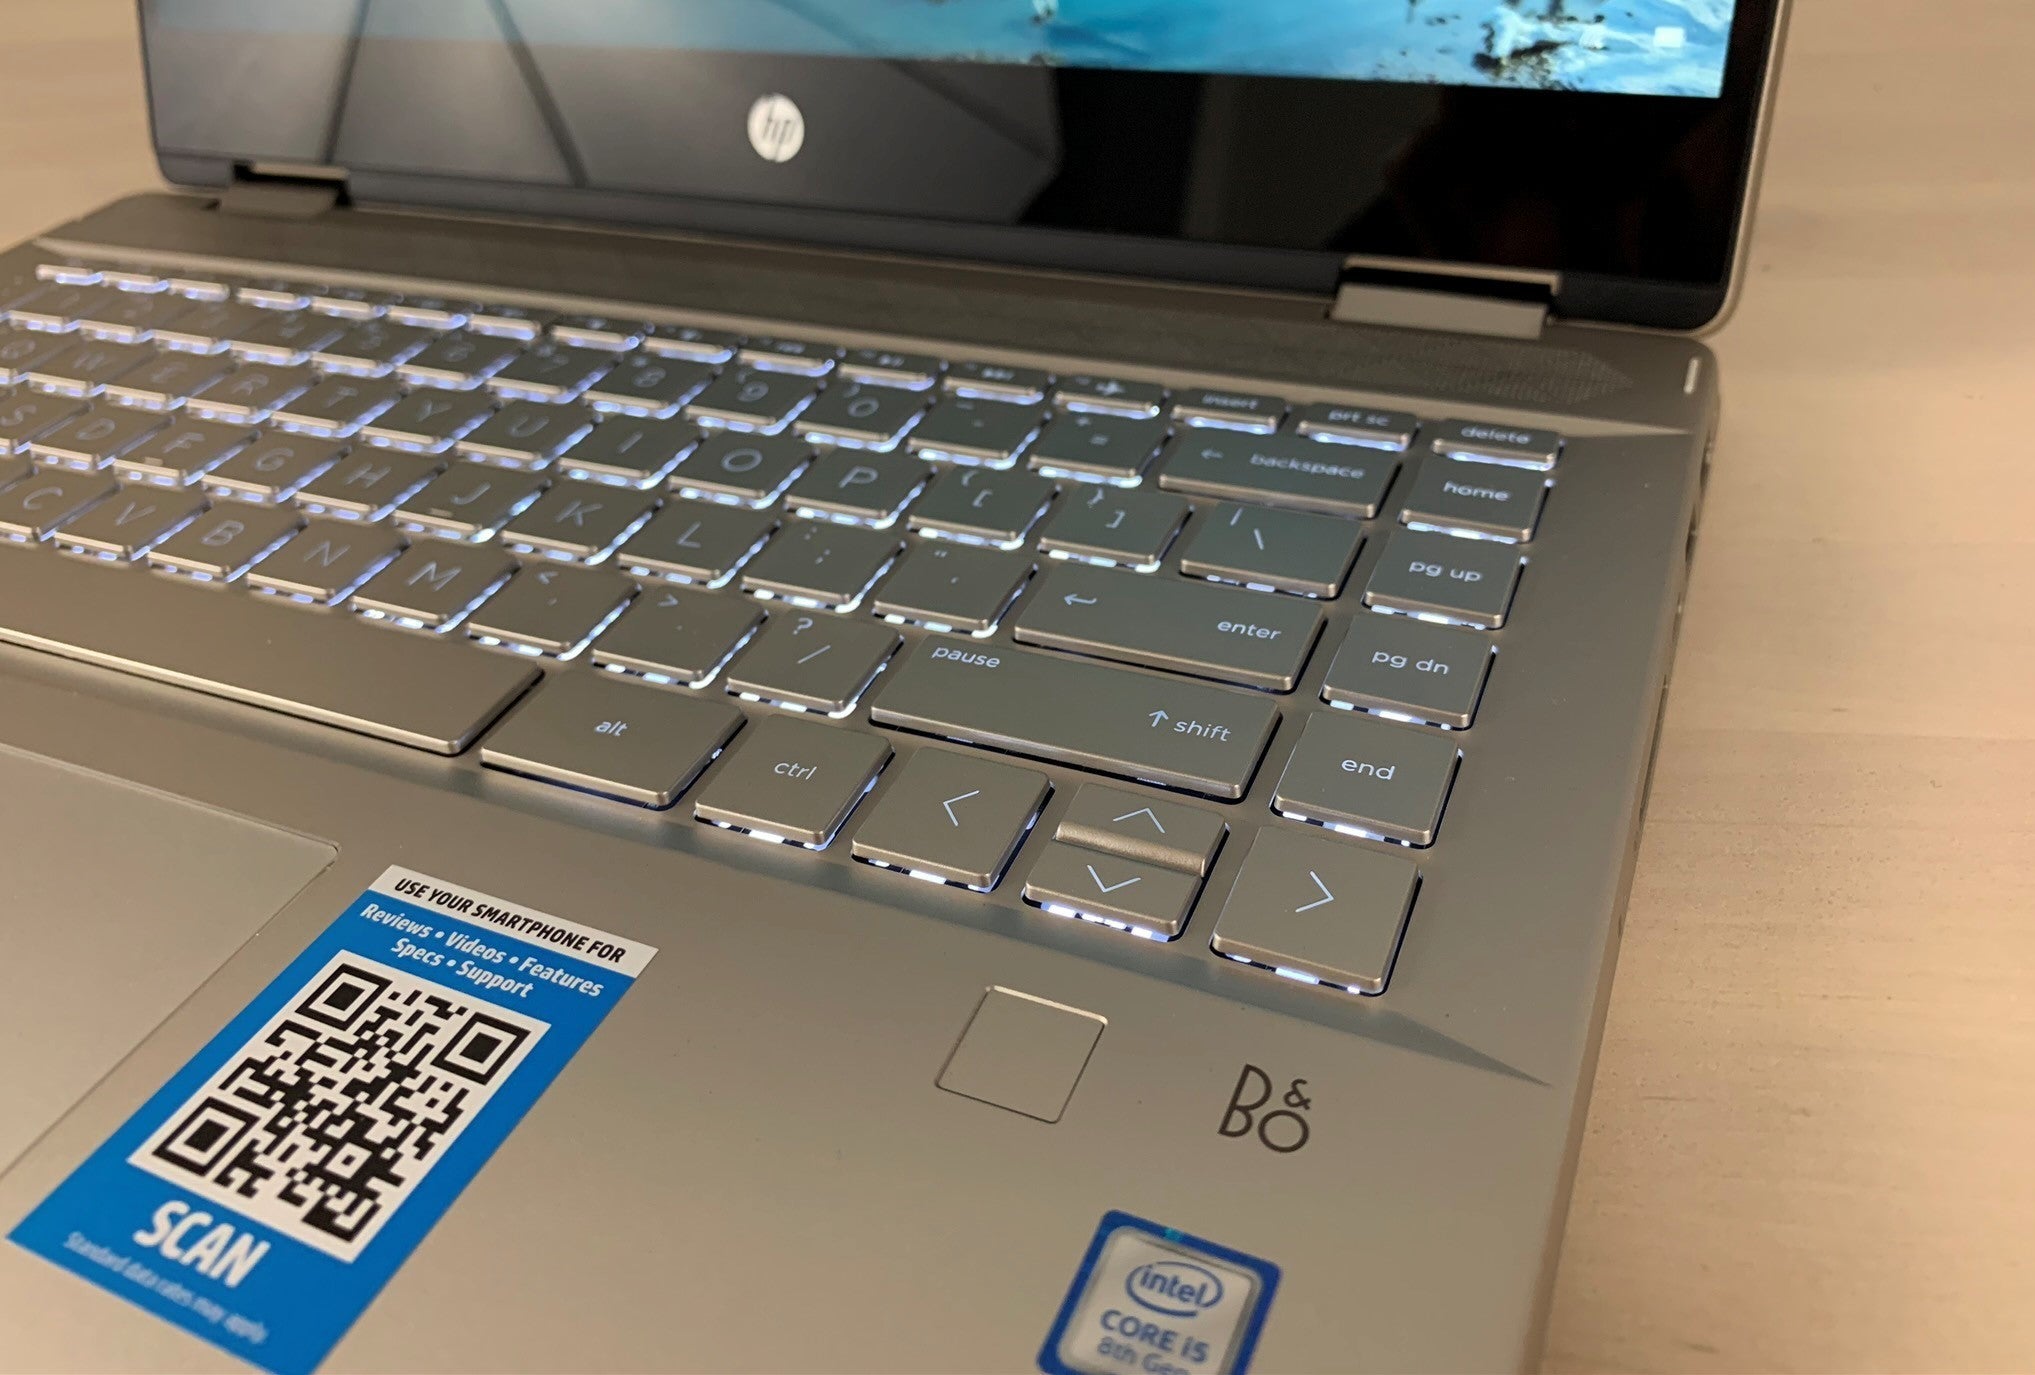 HP Pavilion x360 14m-dh0003dx review: A sturdy 2-in-1 with dependable